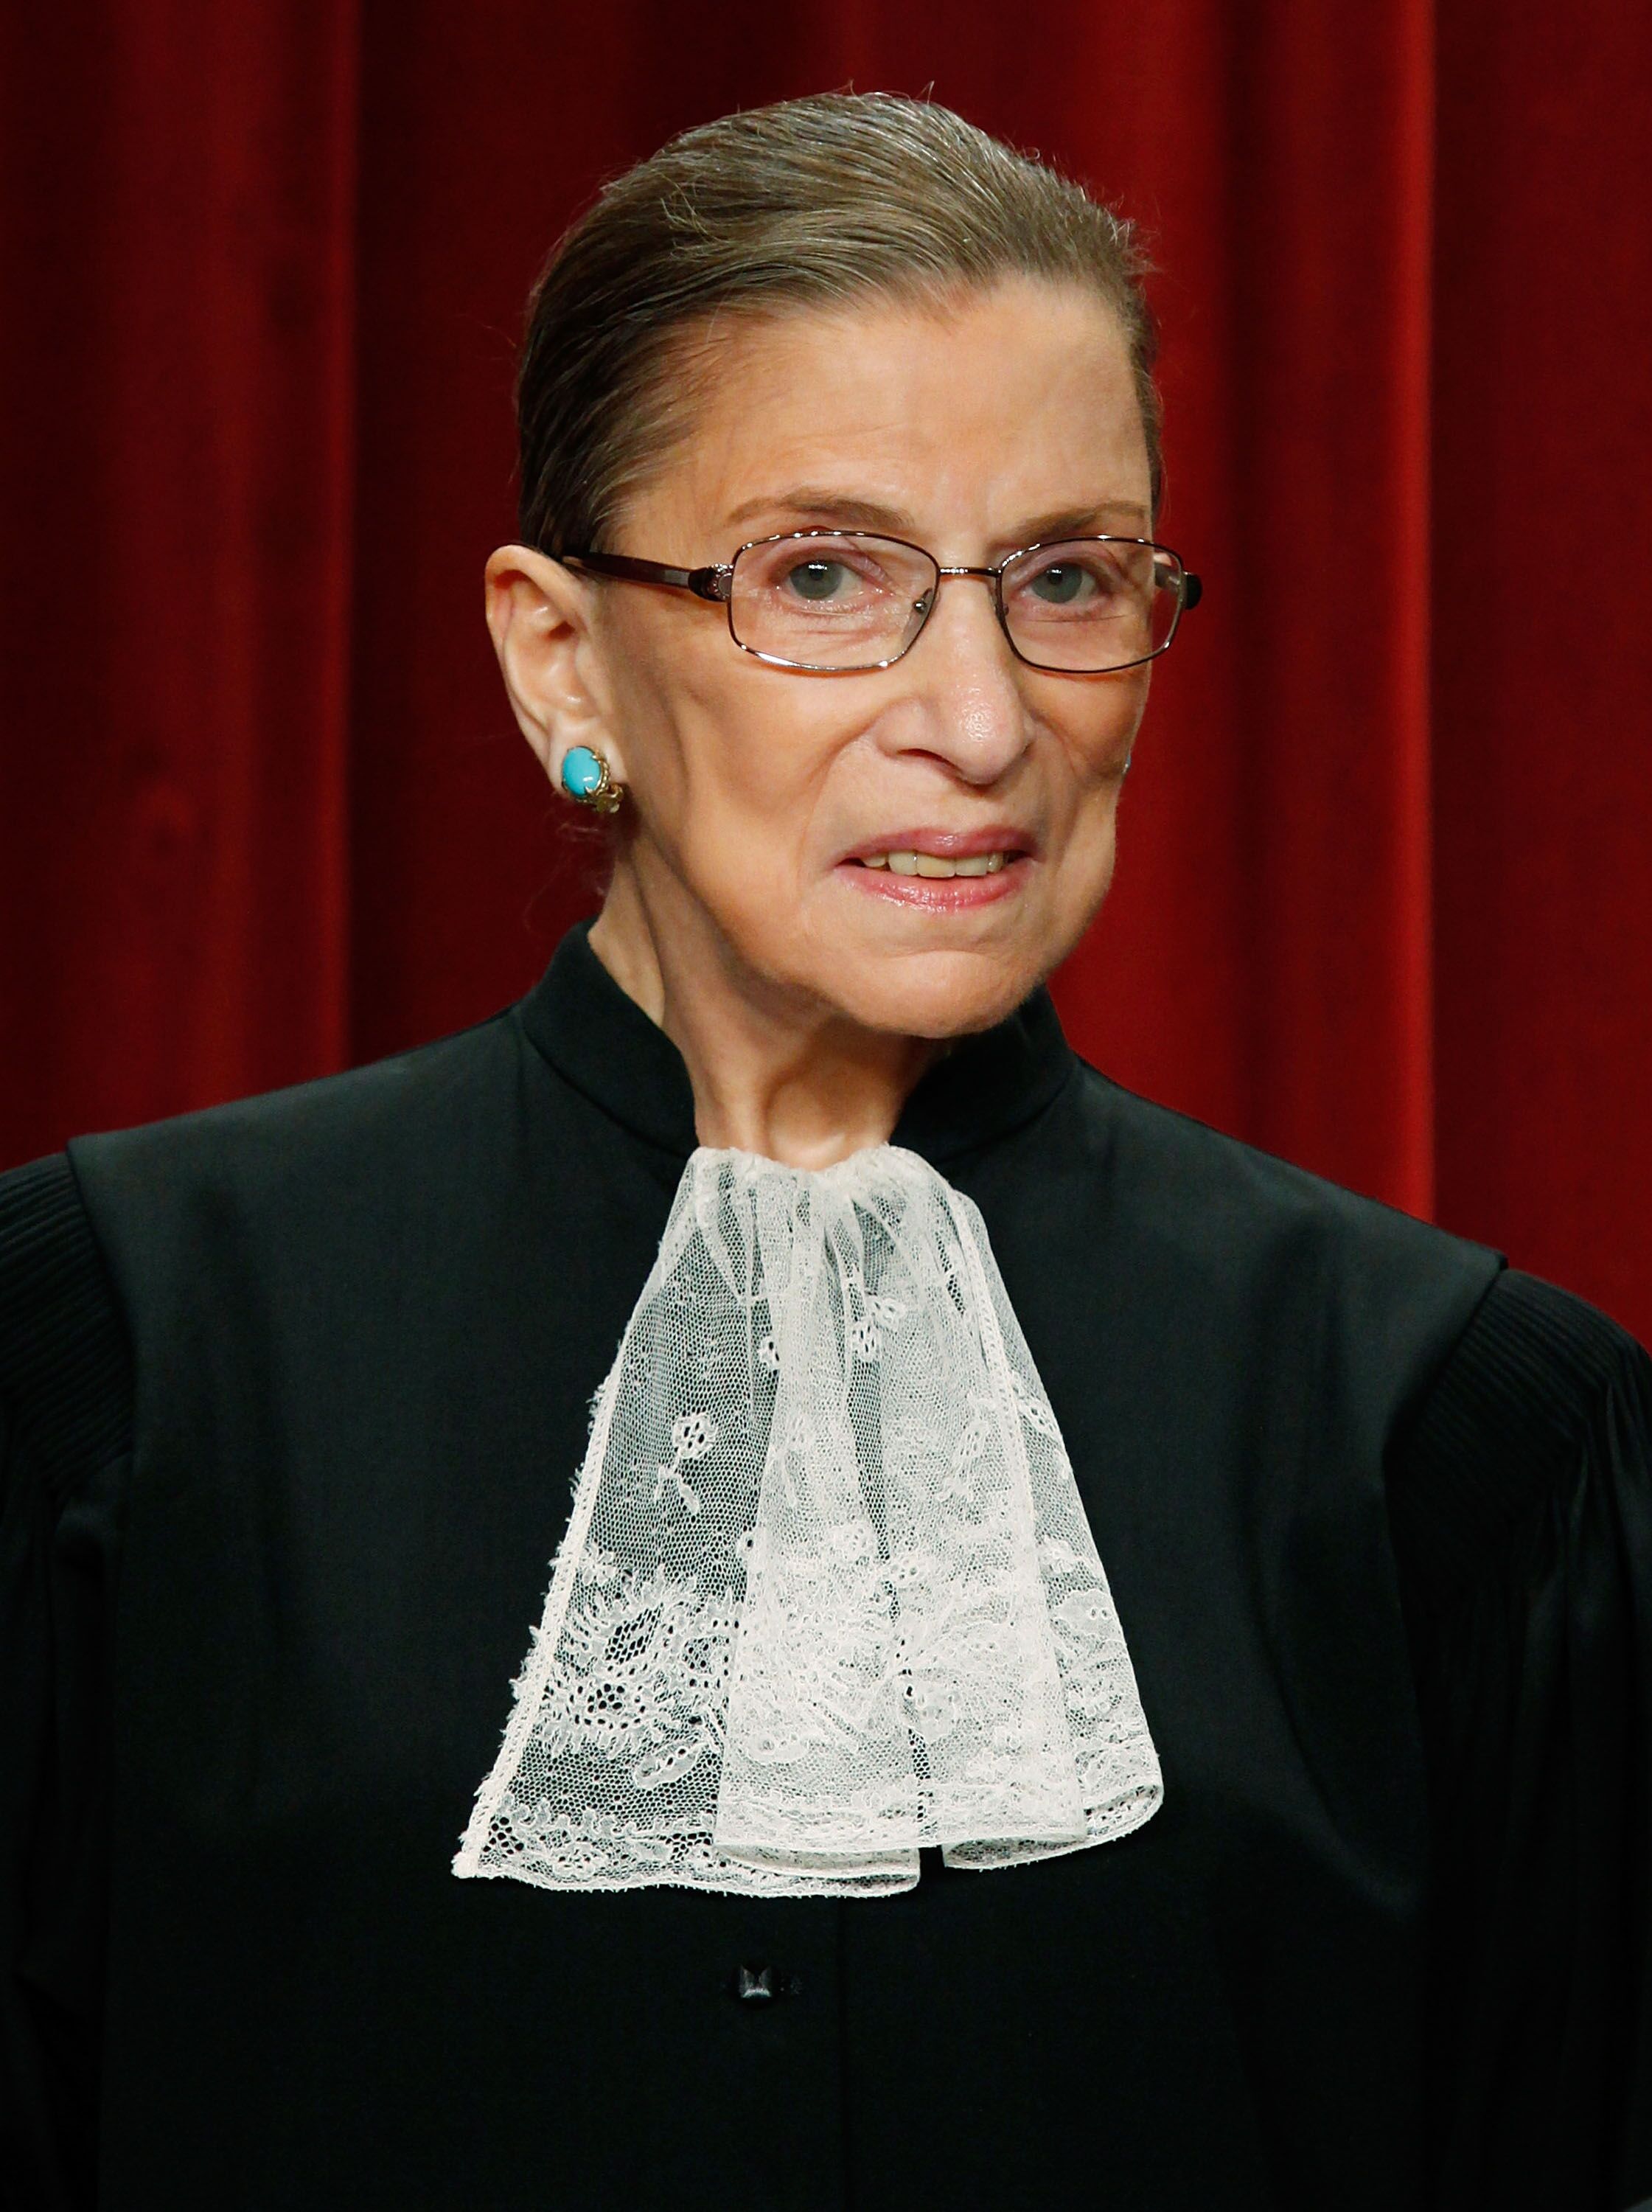  Ruth Bader Ginsburg poses during a group photograph at the Supreme Court building on September 29, 2009 | Source: Getty Images